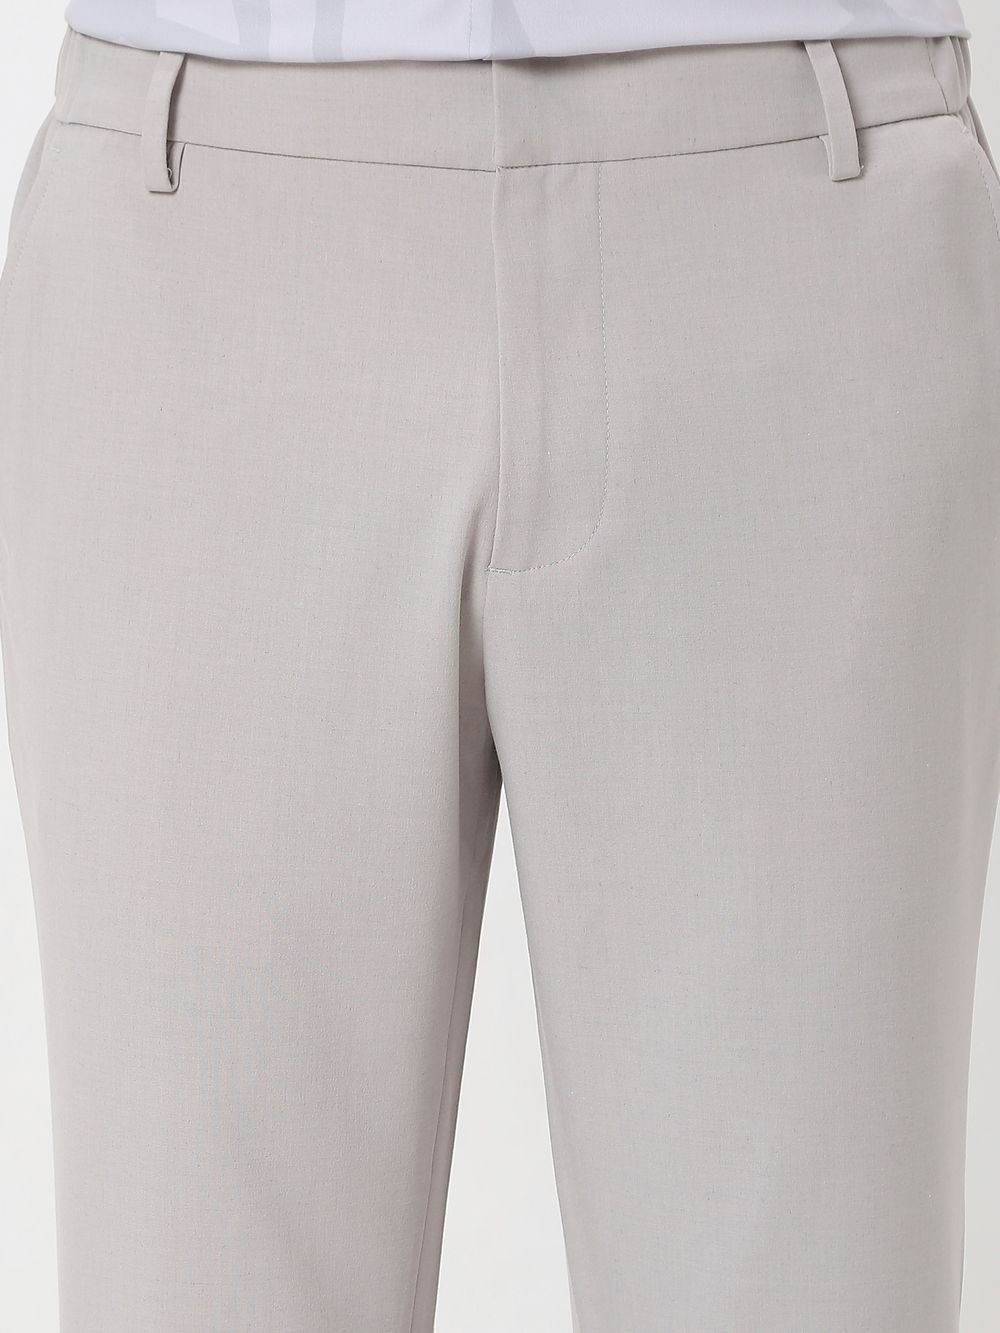 Stone Slim Fit Textured Jersey Stretch Chinos Trouser